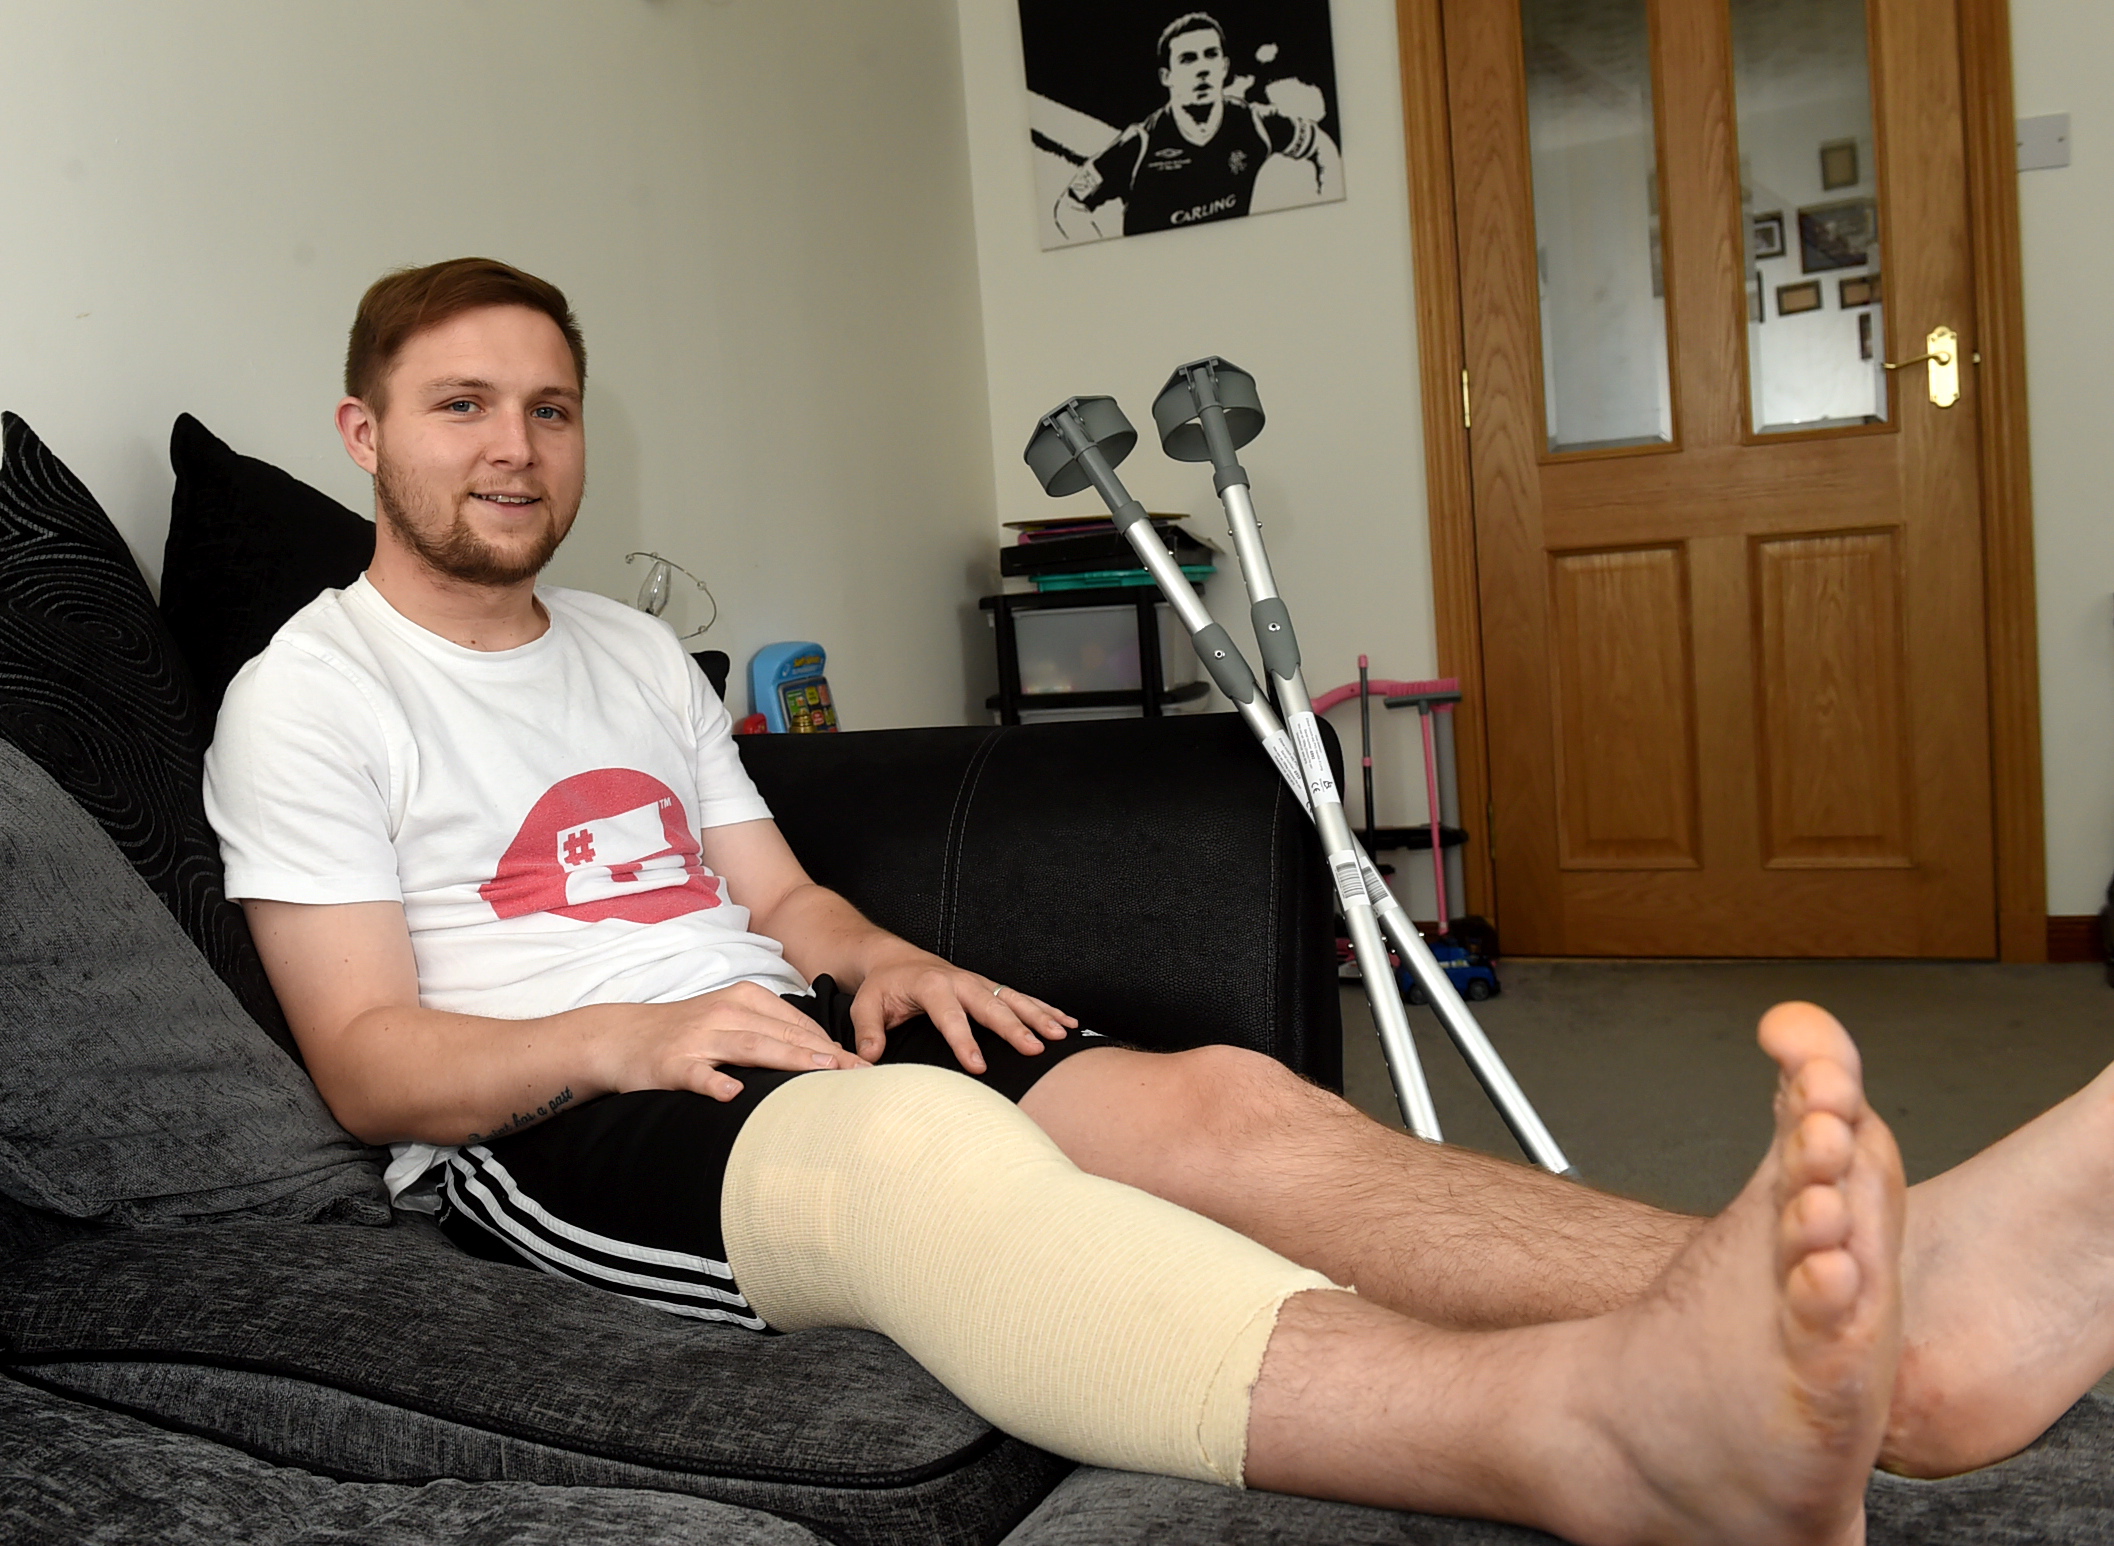 Highland League footballer, Dane Ballard has thanked those who donated more than £6,000 so he could have career-saving surgery.